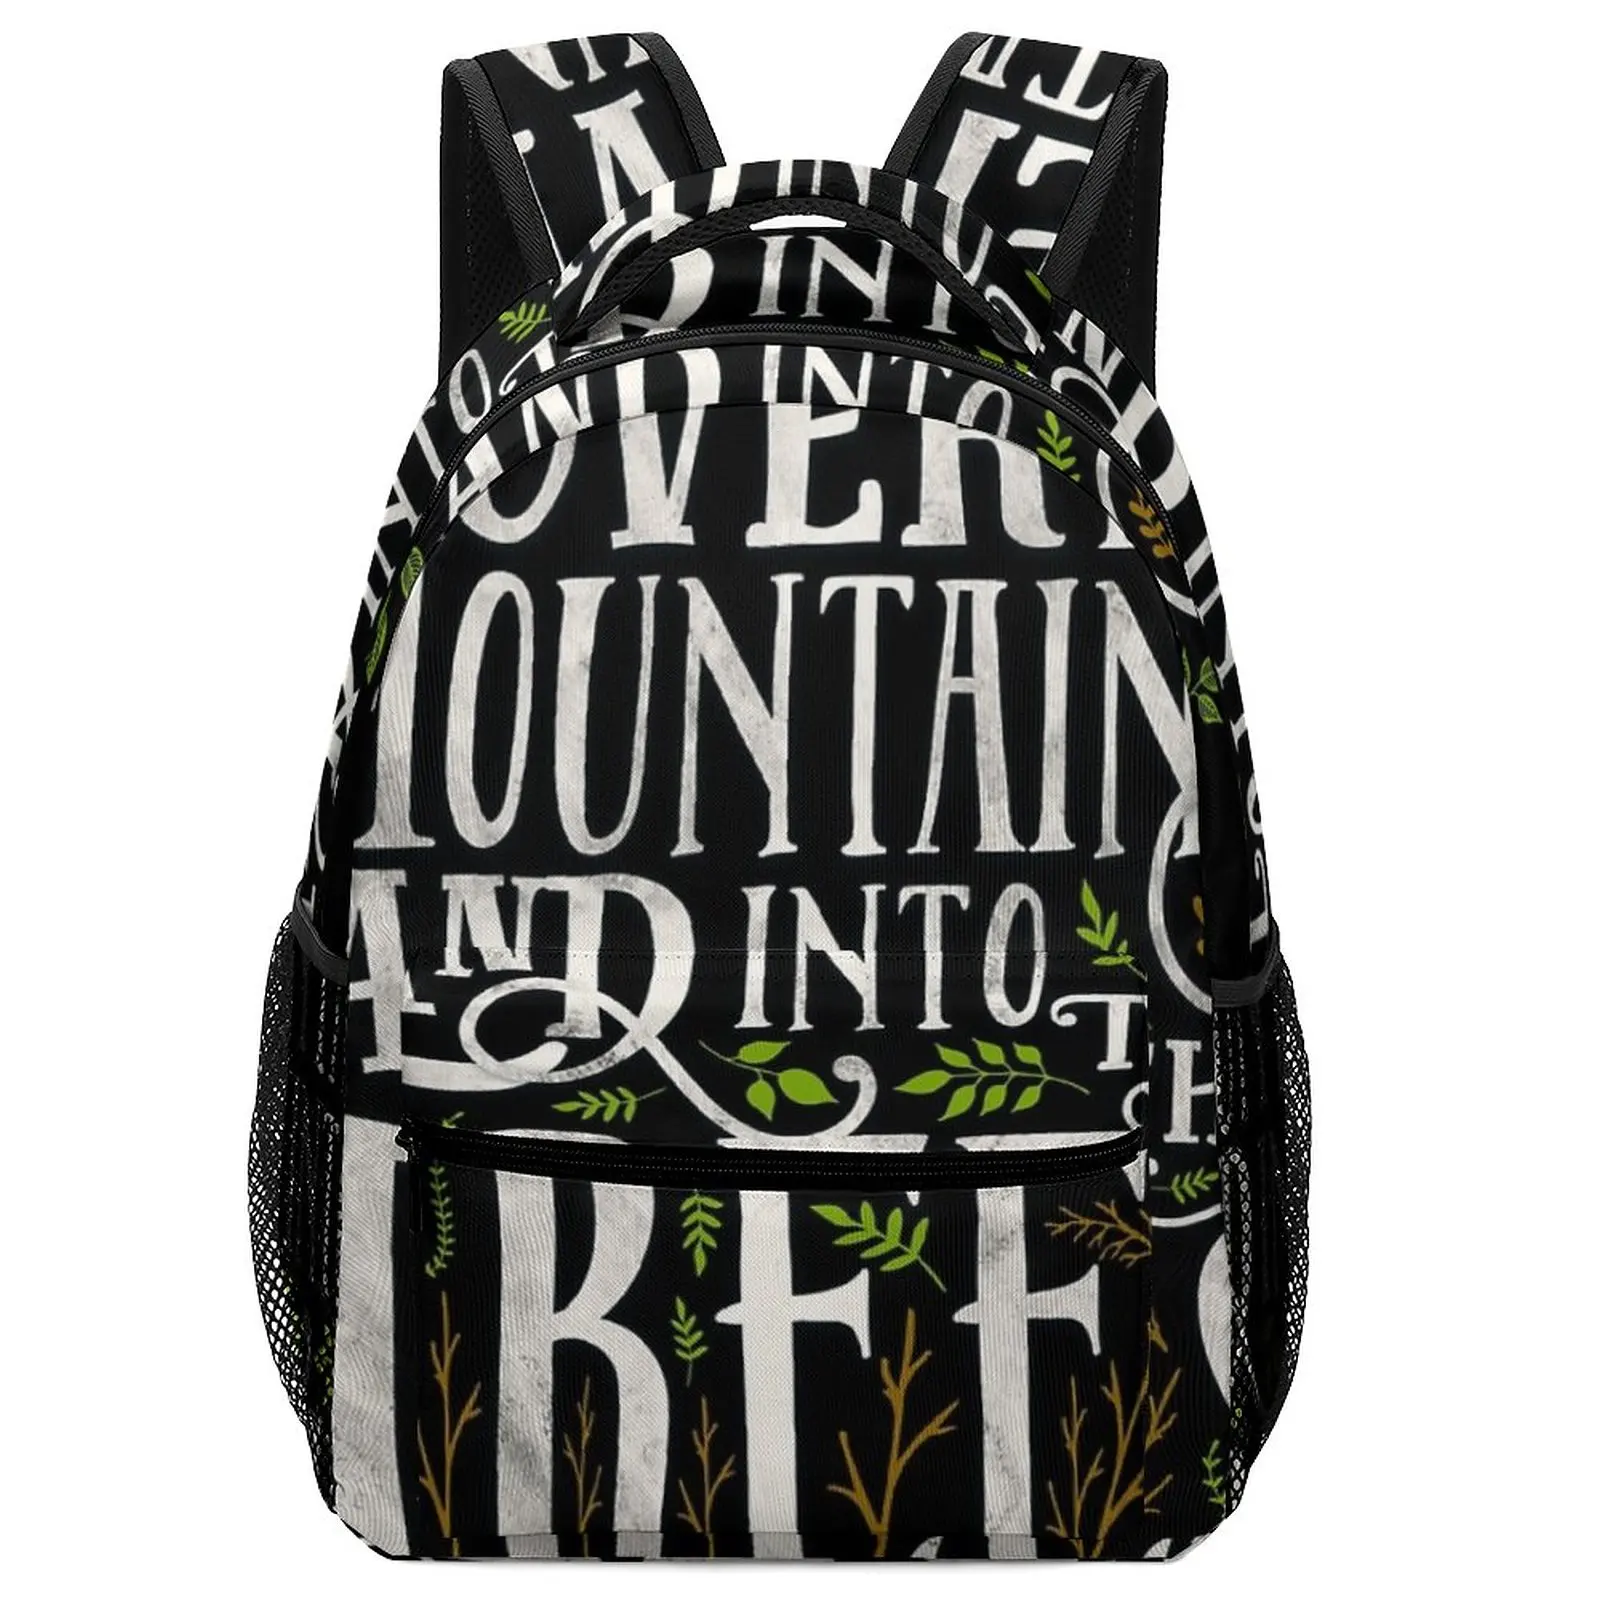 2022 Art Over The Mountains And Into The Trees Boys Children Baby Backpack Nursery Men Women School Bag Children School Backpack